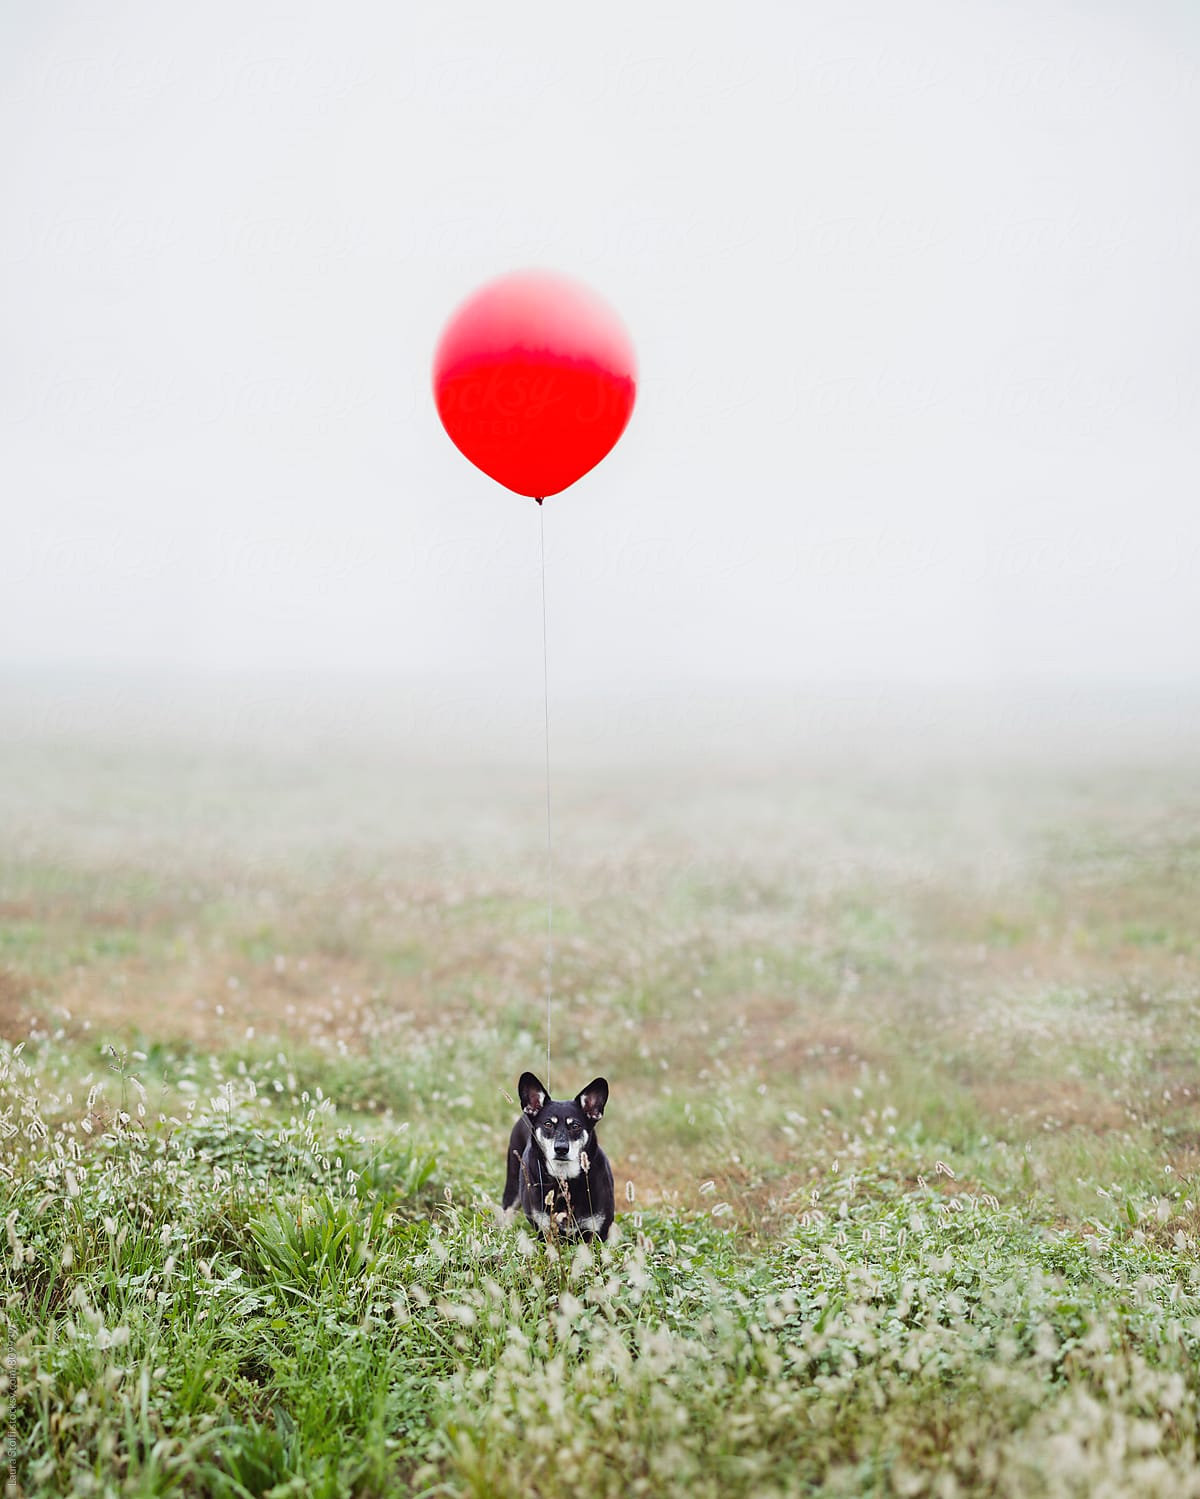 Little dog stands in foggy field with big red balloon floating above her as a leash